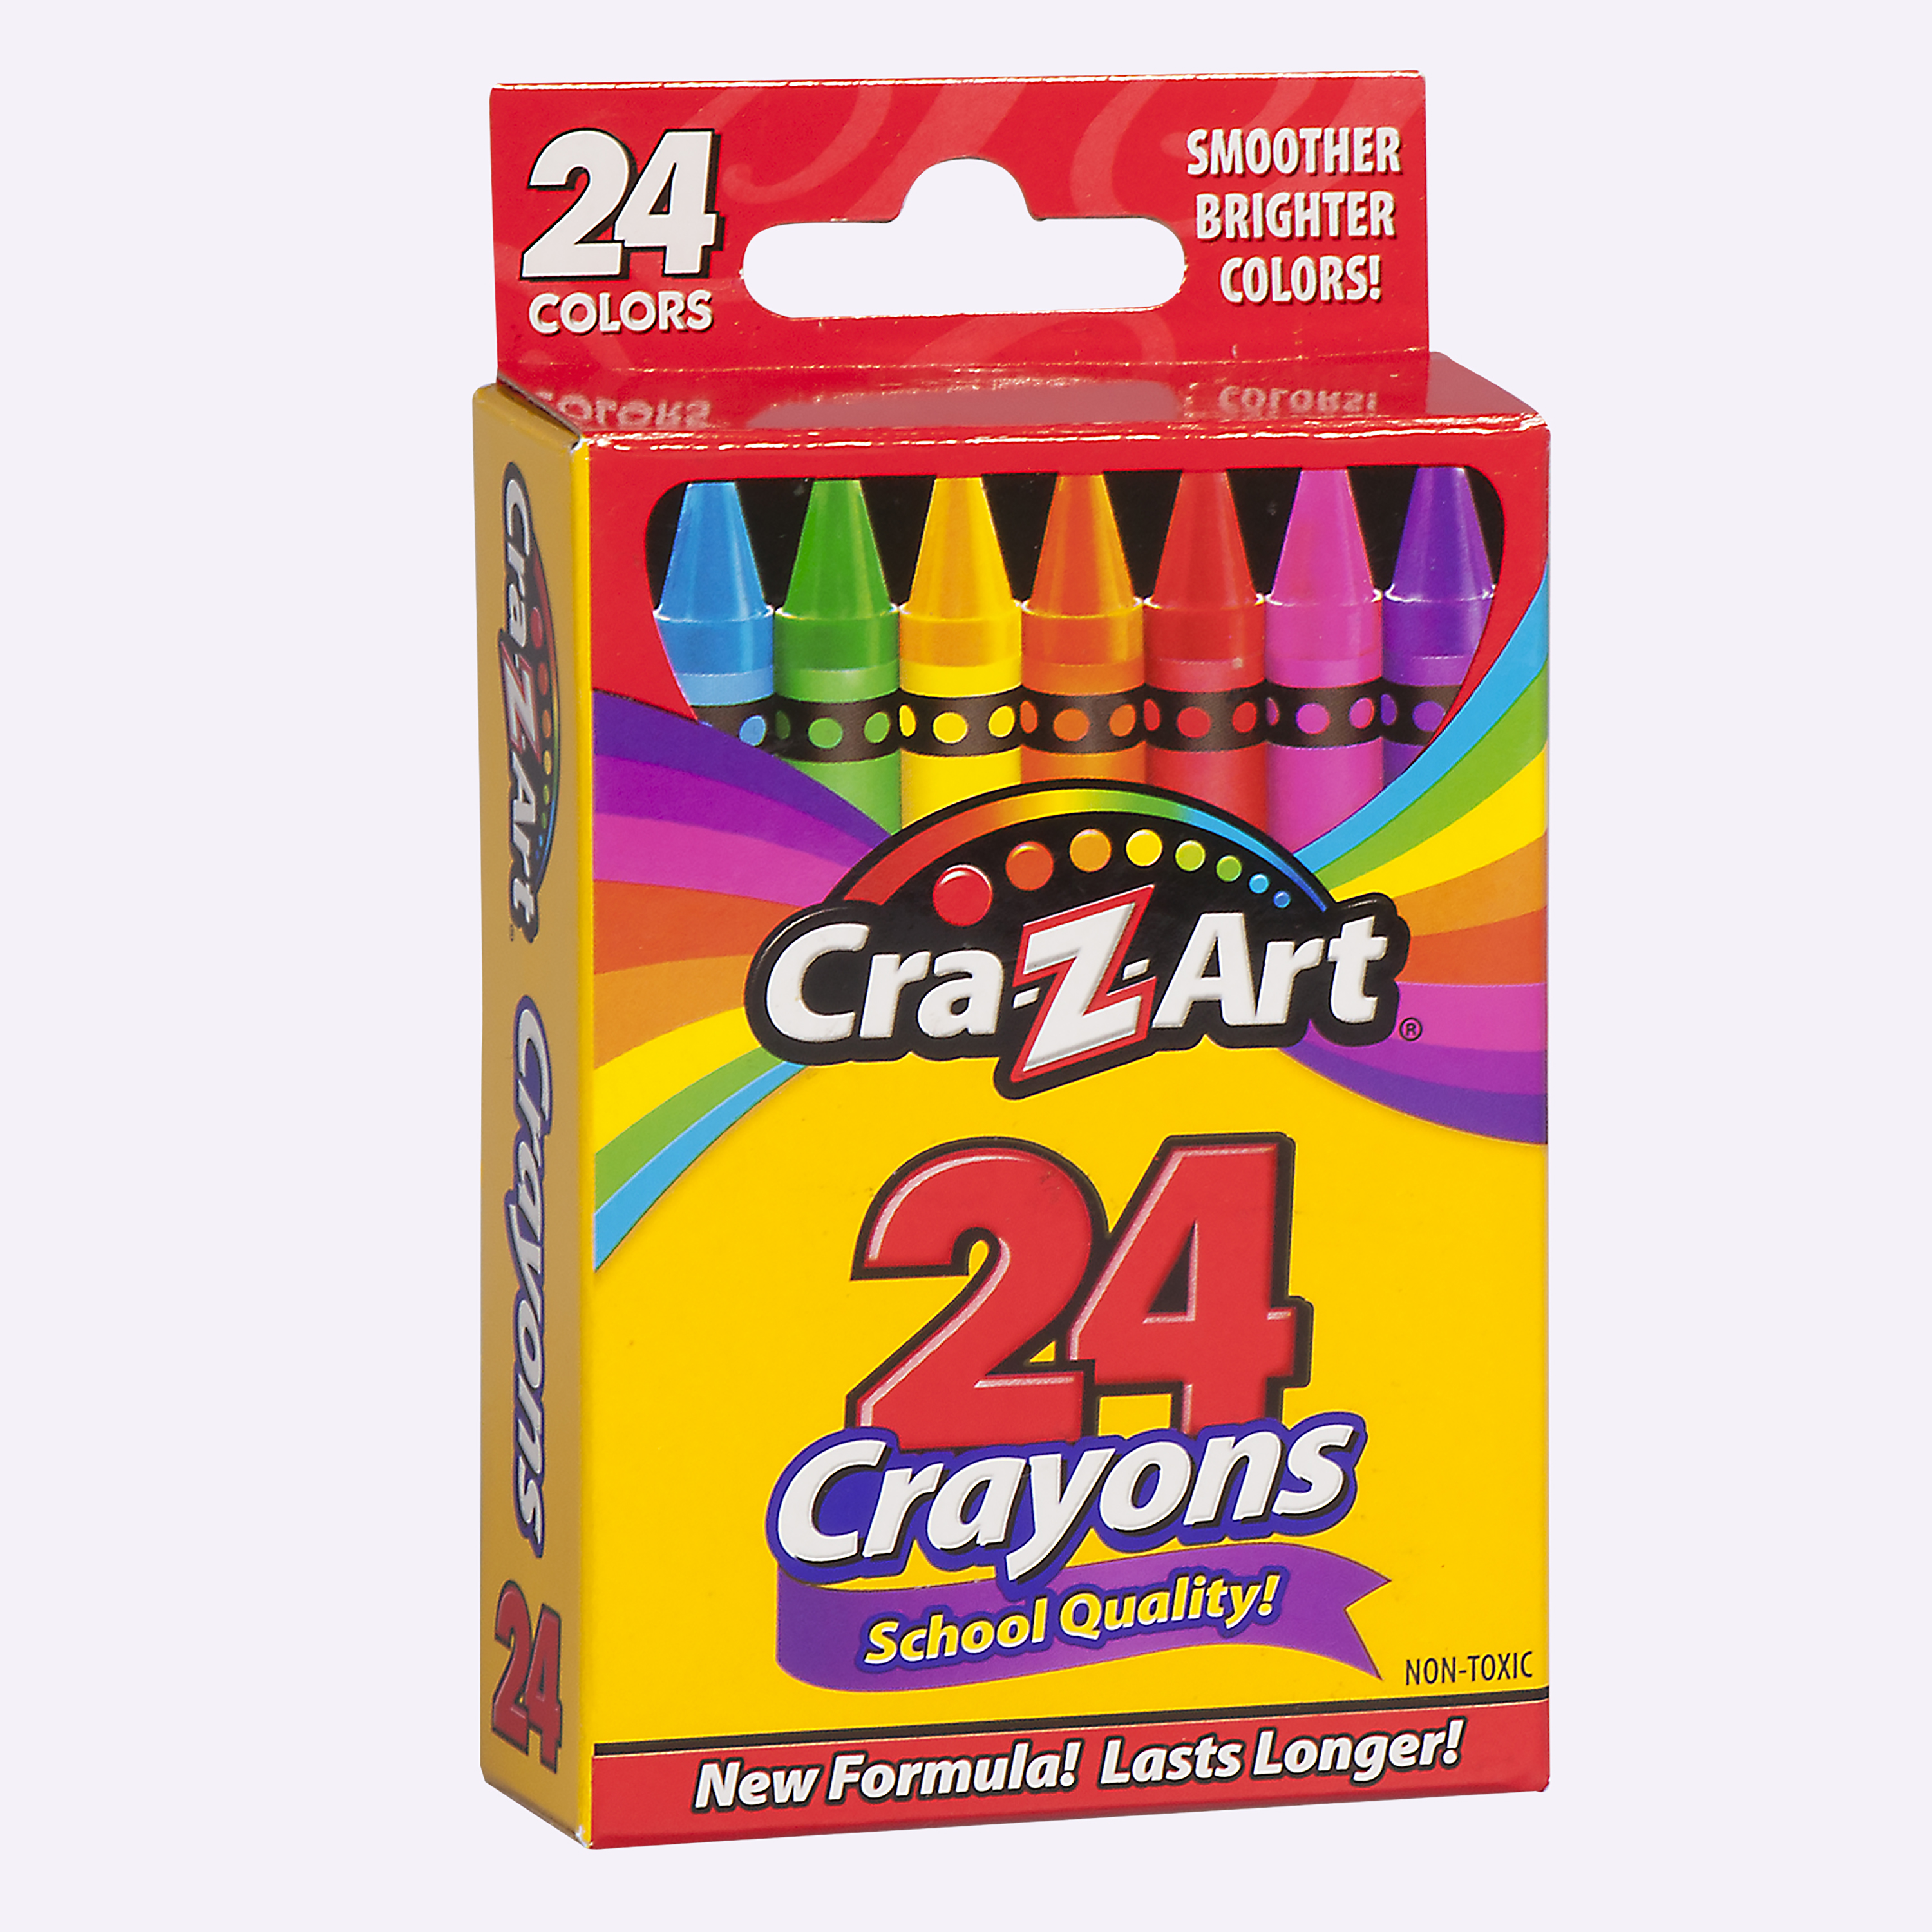 Cra-Z-Art School Quality Multicolor Crayons, 24 Count, Back to School Supplies - image 5 of 11